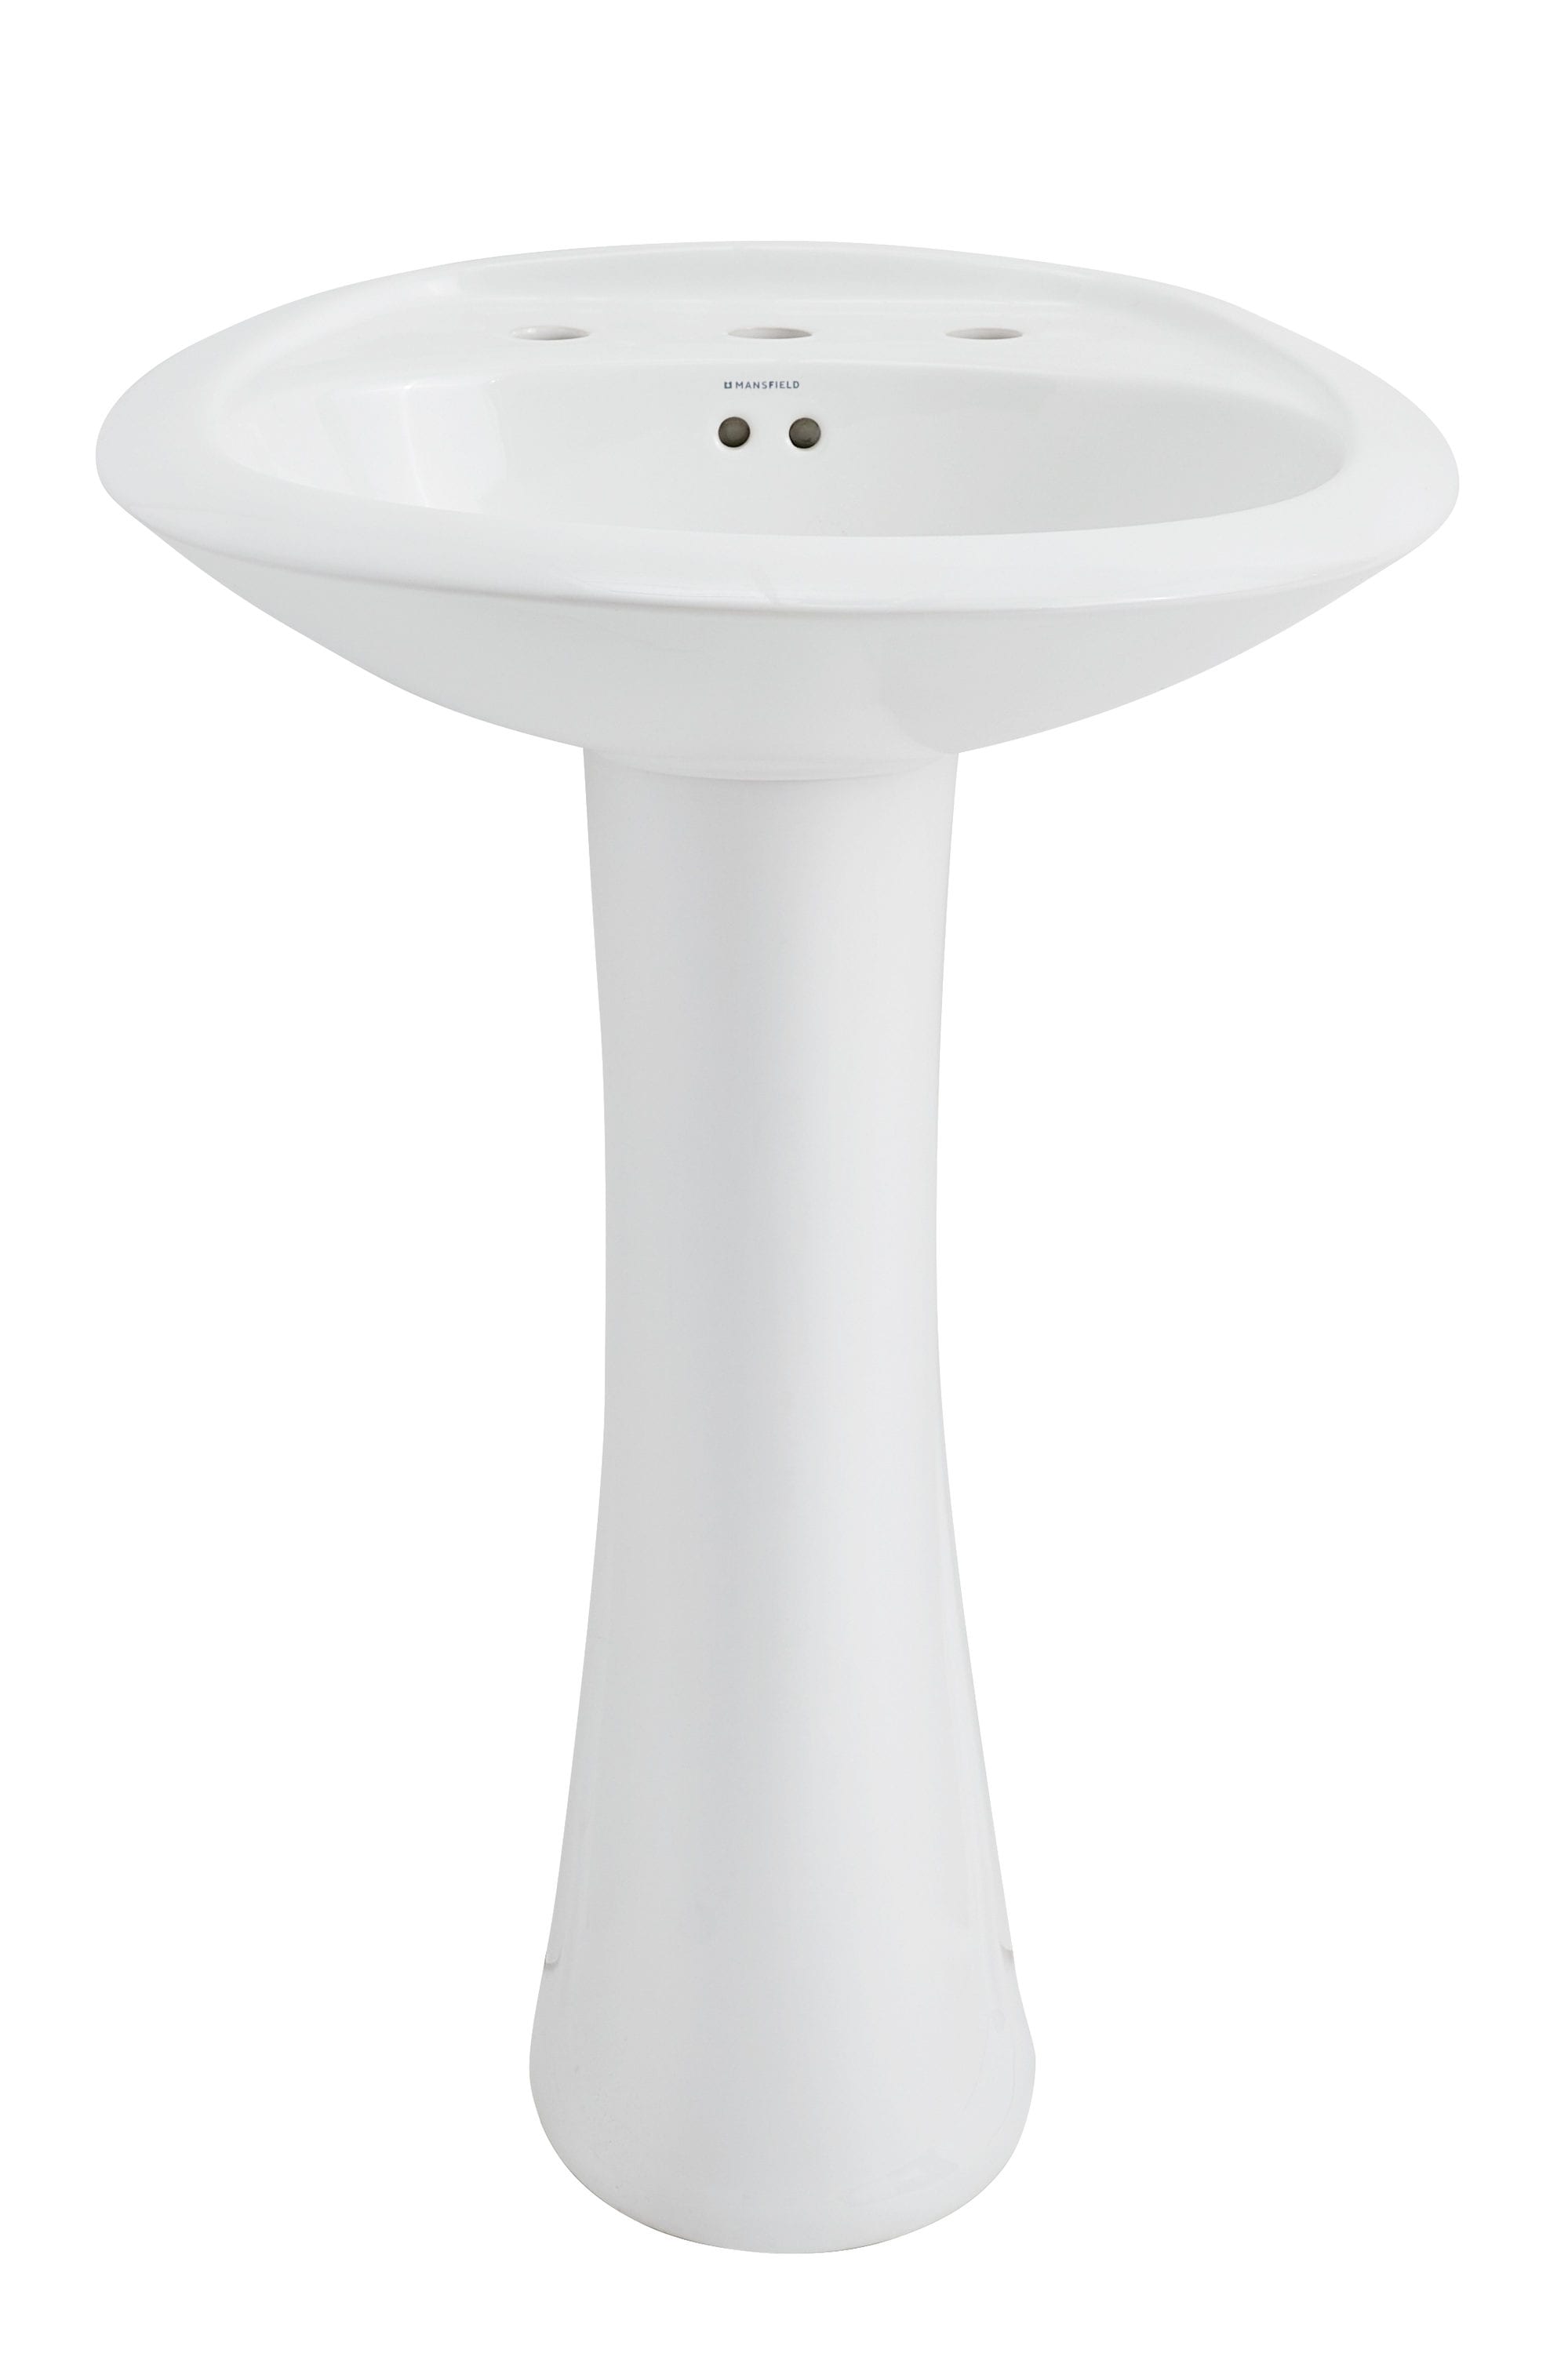 Ondine White Pedestal Bathroom Sink Combo with Overflow Hole